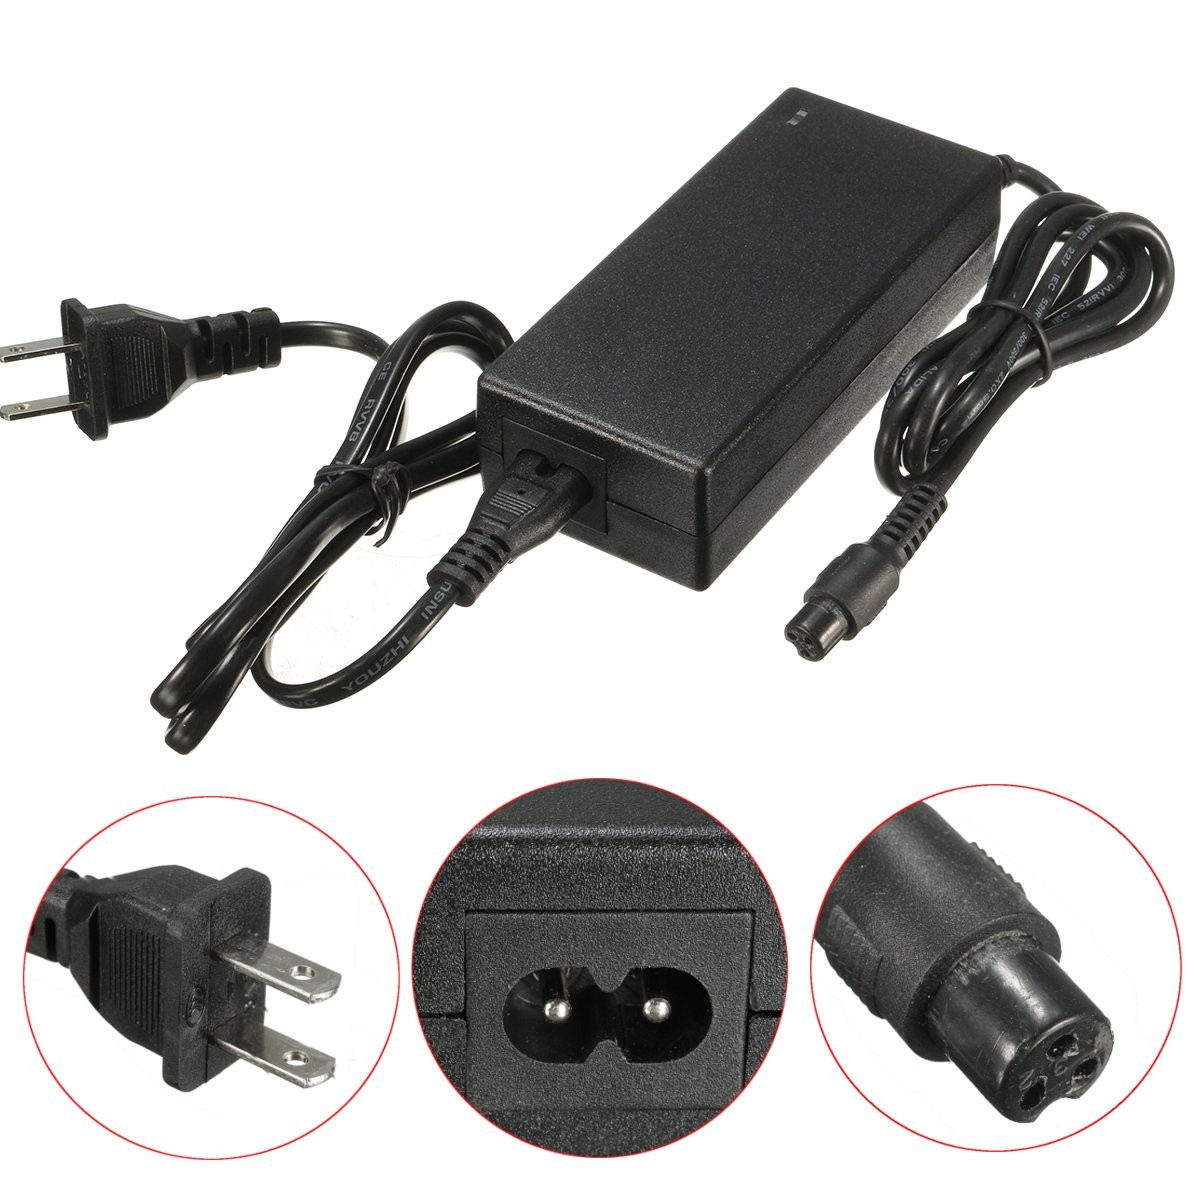 

BIKIGHT 42V 2A AC DC Power Adapter Battery Charger For Smart Electric Balance Scooter